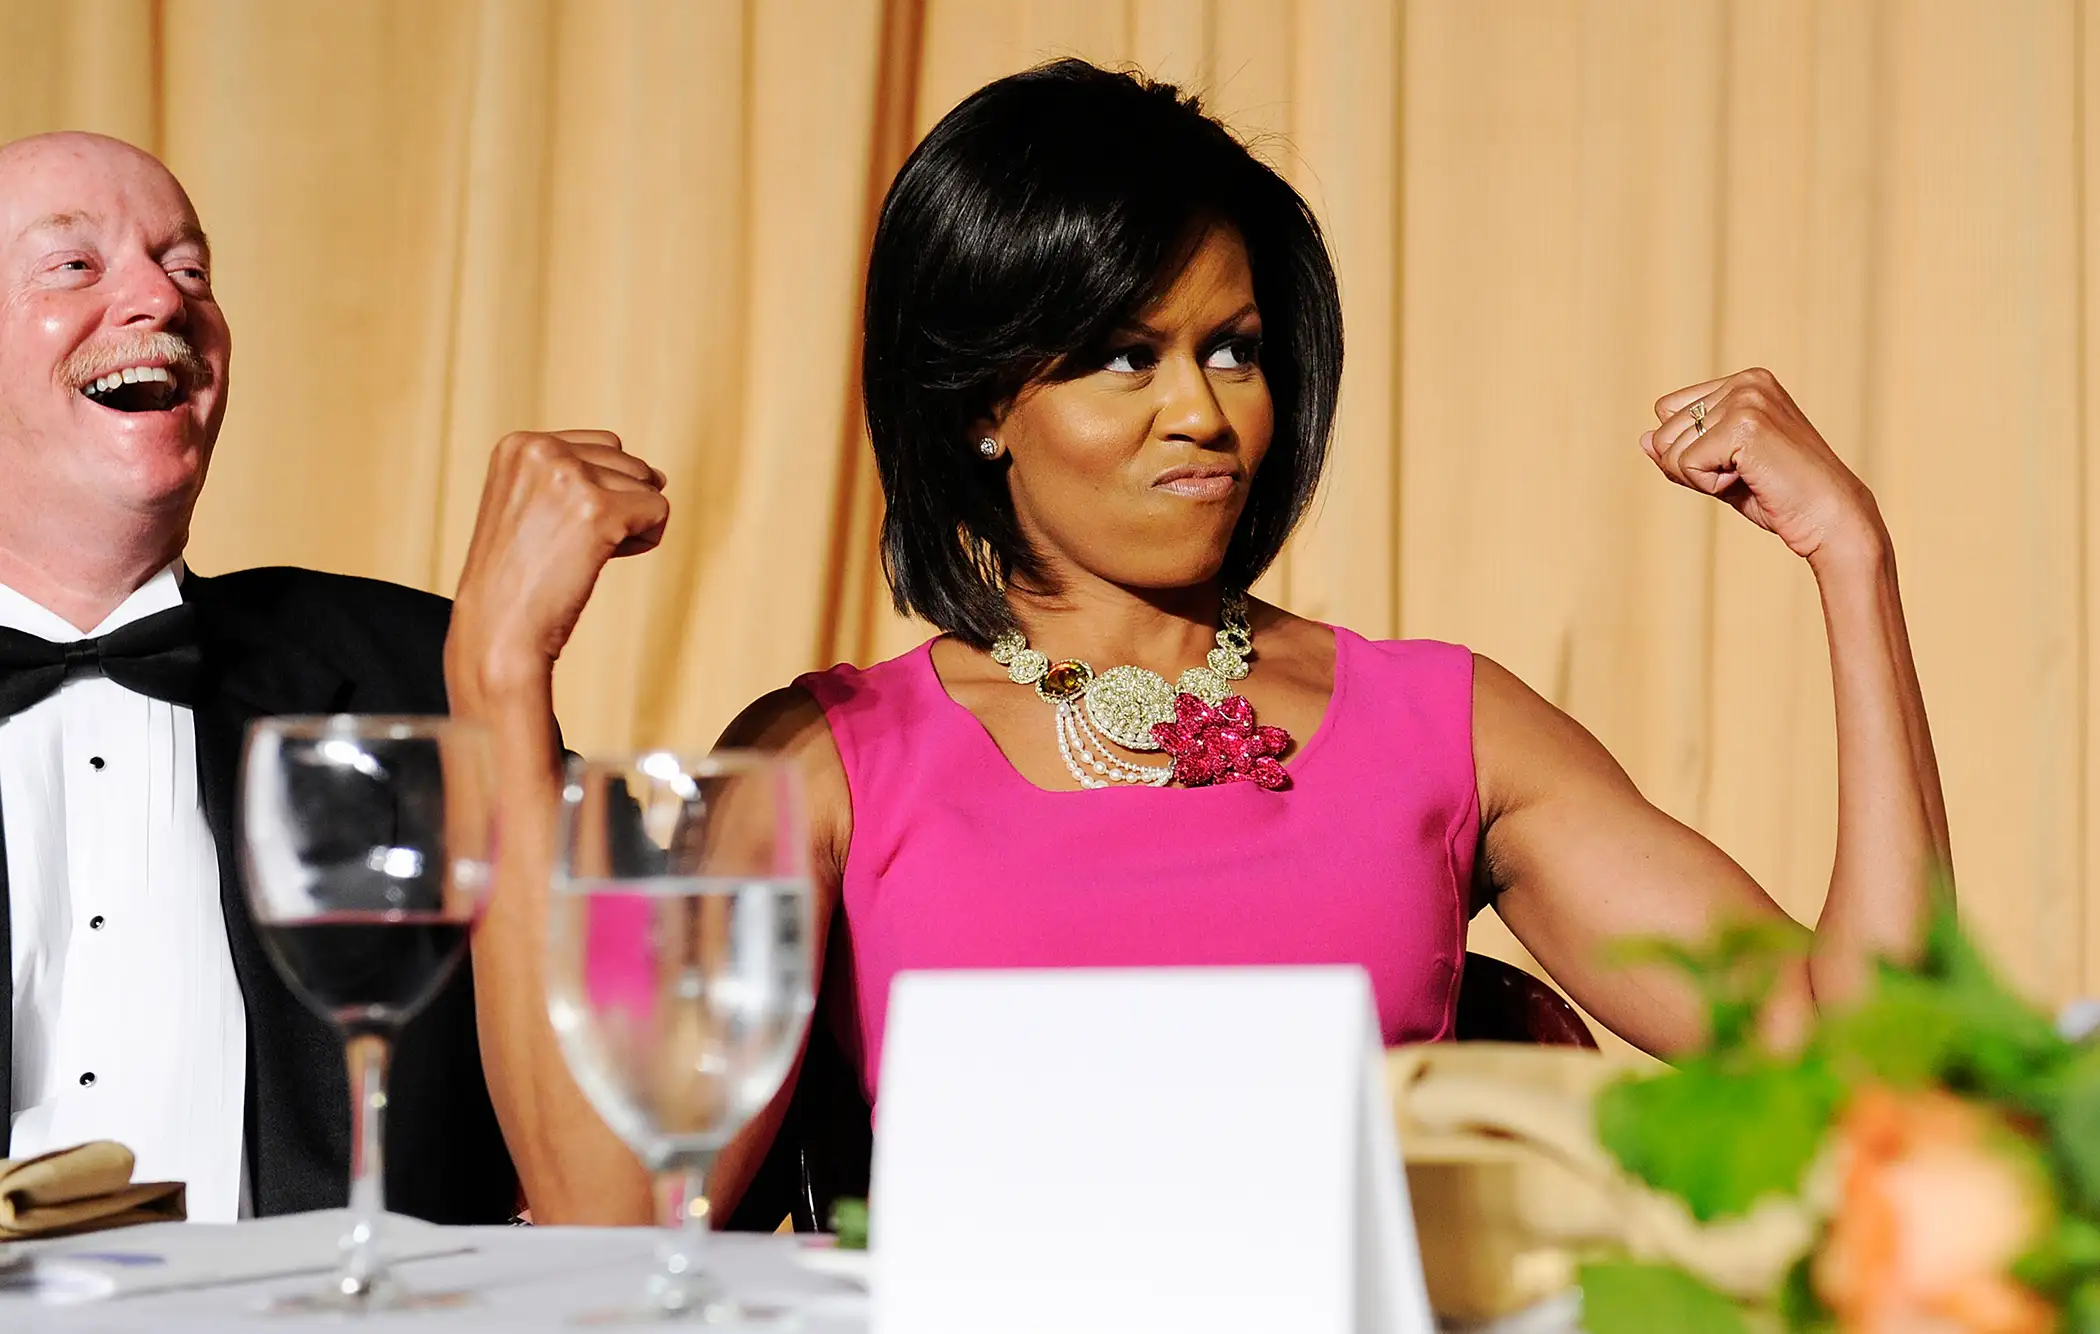 U.S. first lady Michelle Obama flexes her arms in response to a joke about her habit of wearing sleeveless dresses during the White House Correspondents' Association Dinner in Washington May 9, 2009.